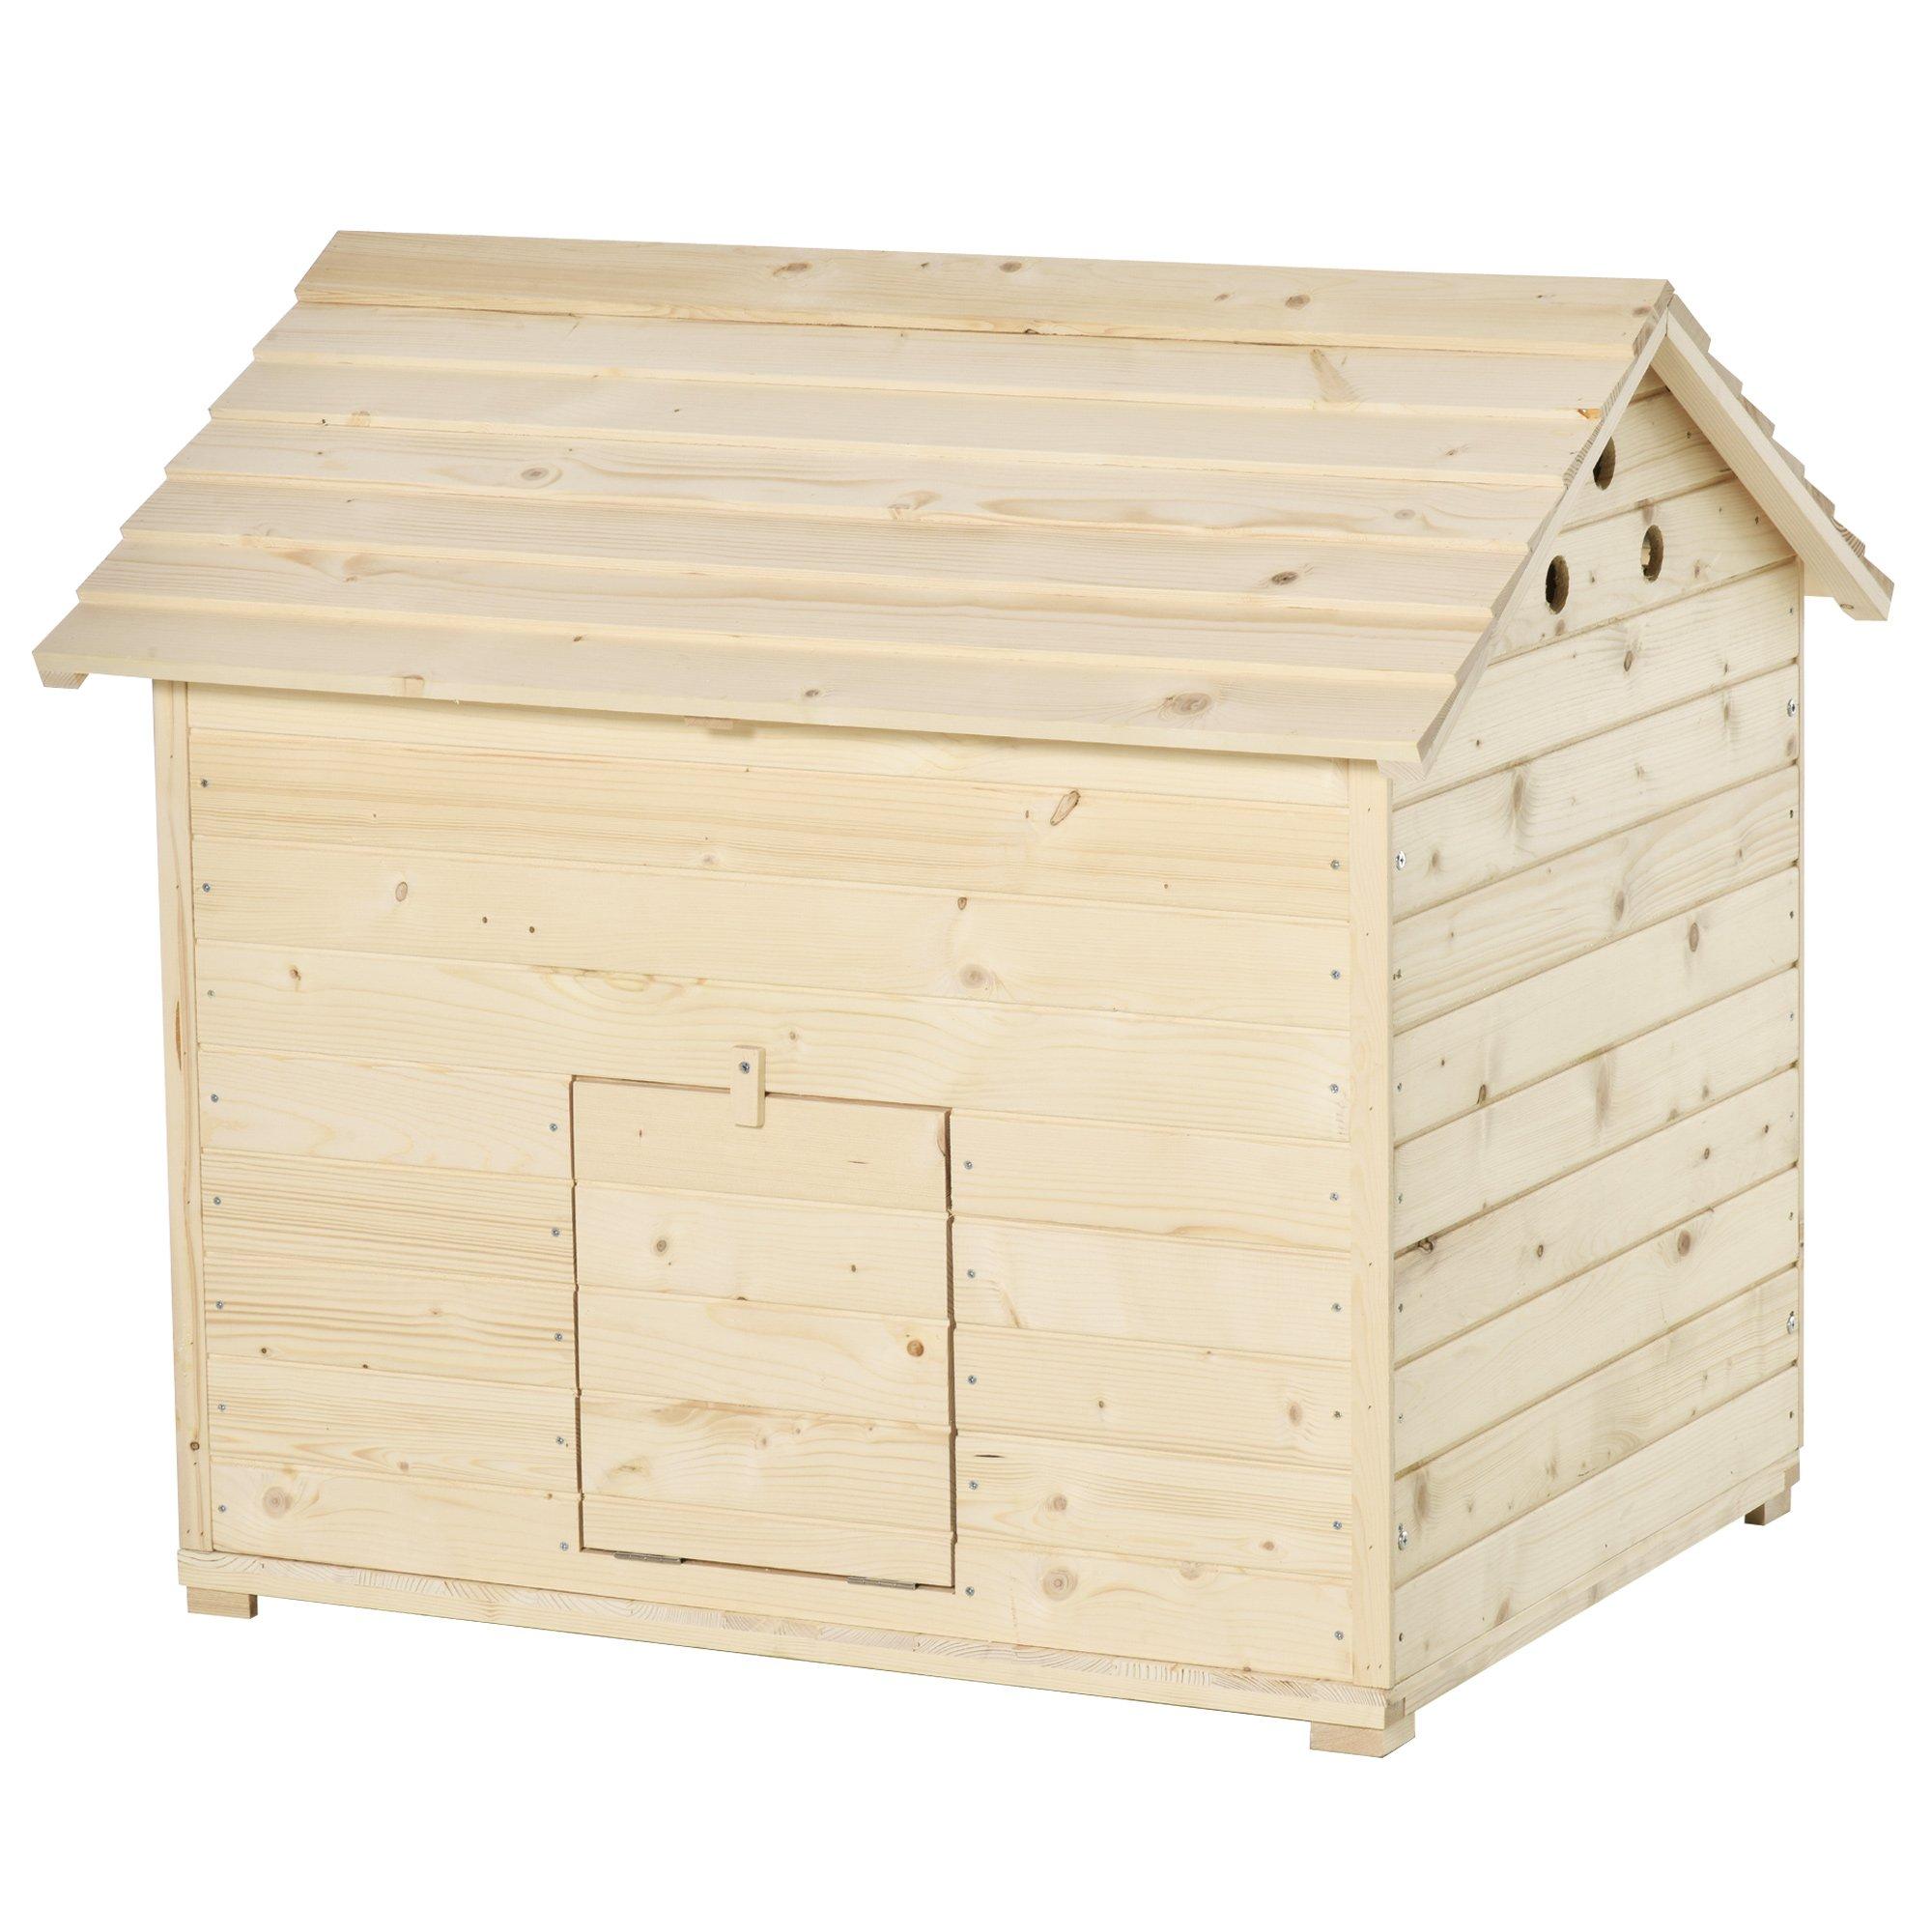 Wooden Duck House for 2-4 Ducks with Open Roof, Raised Base, Air Holes